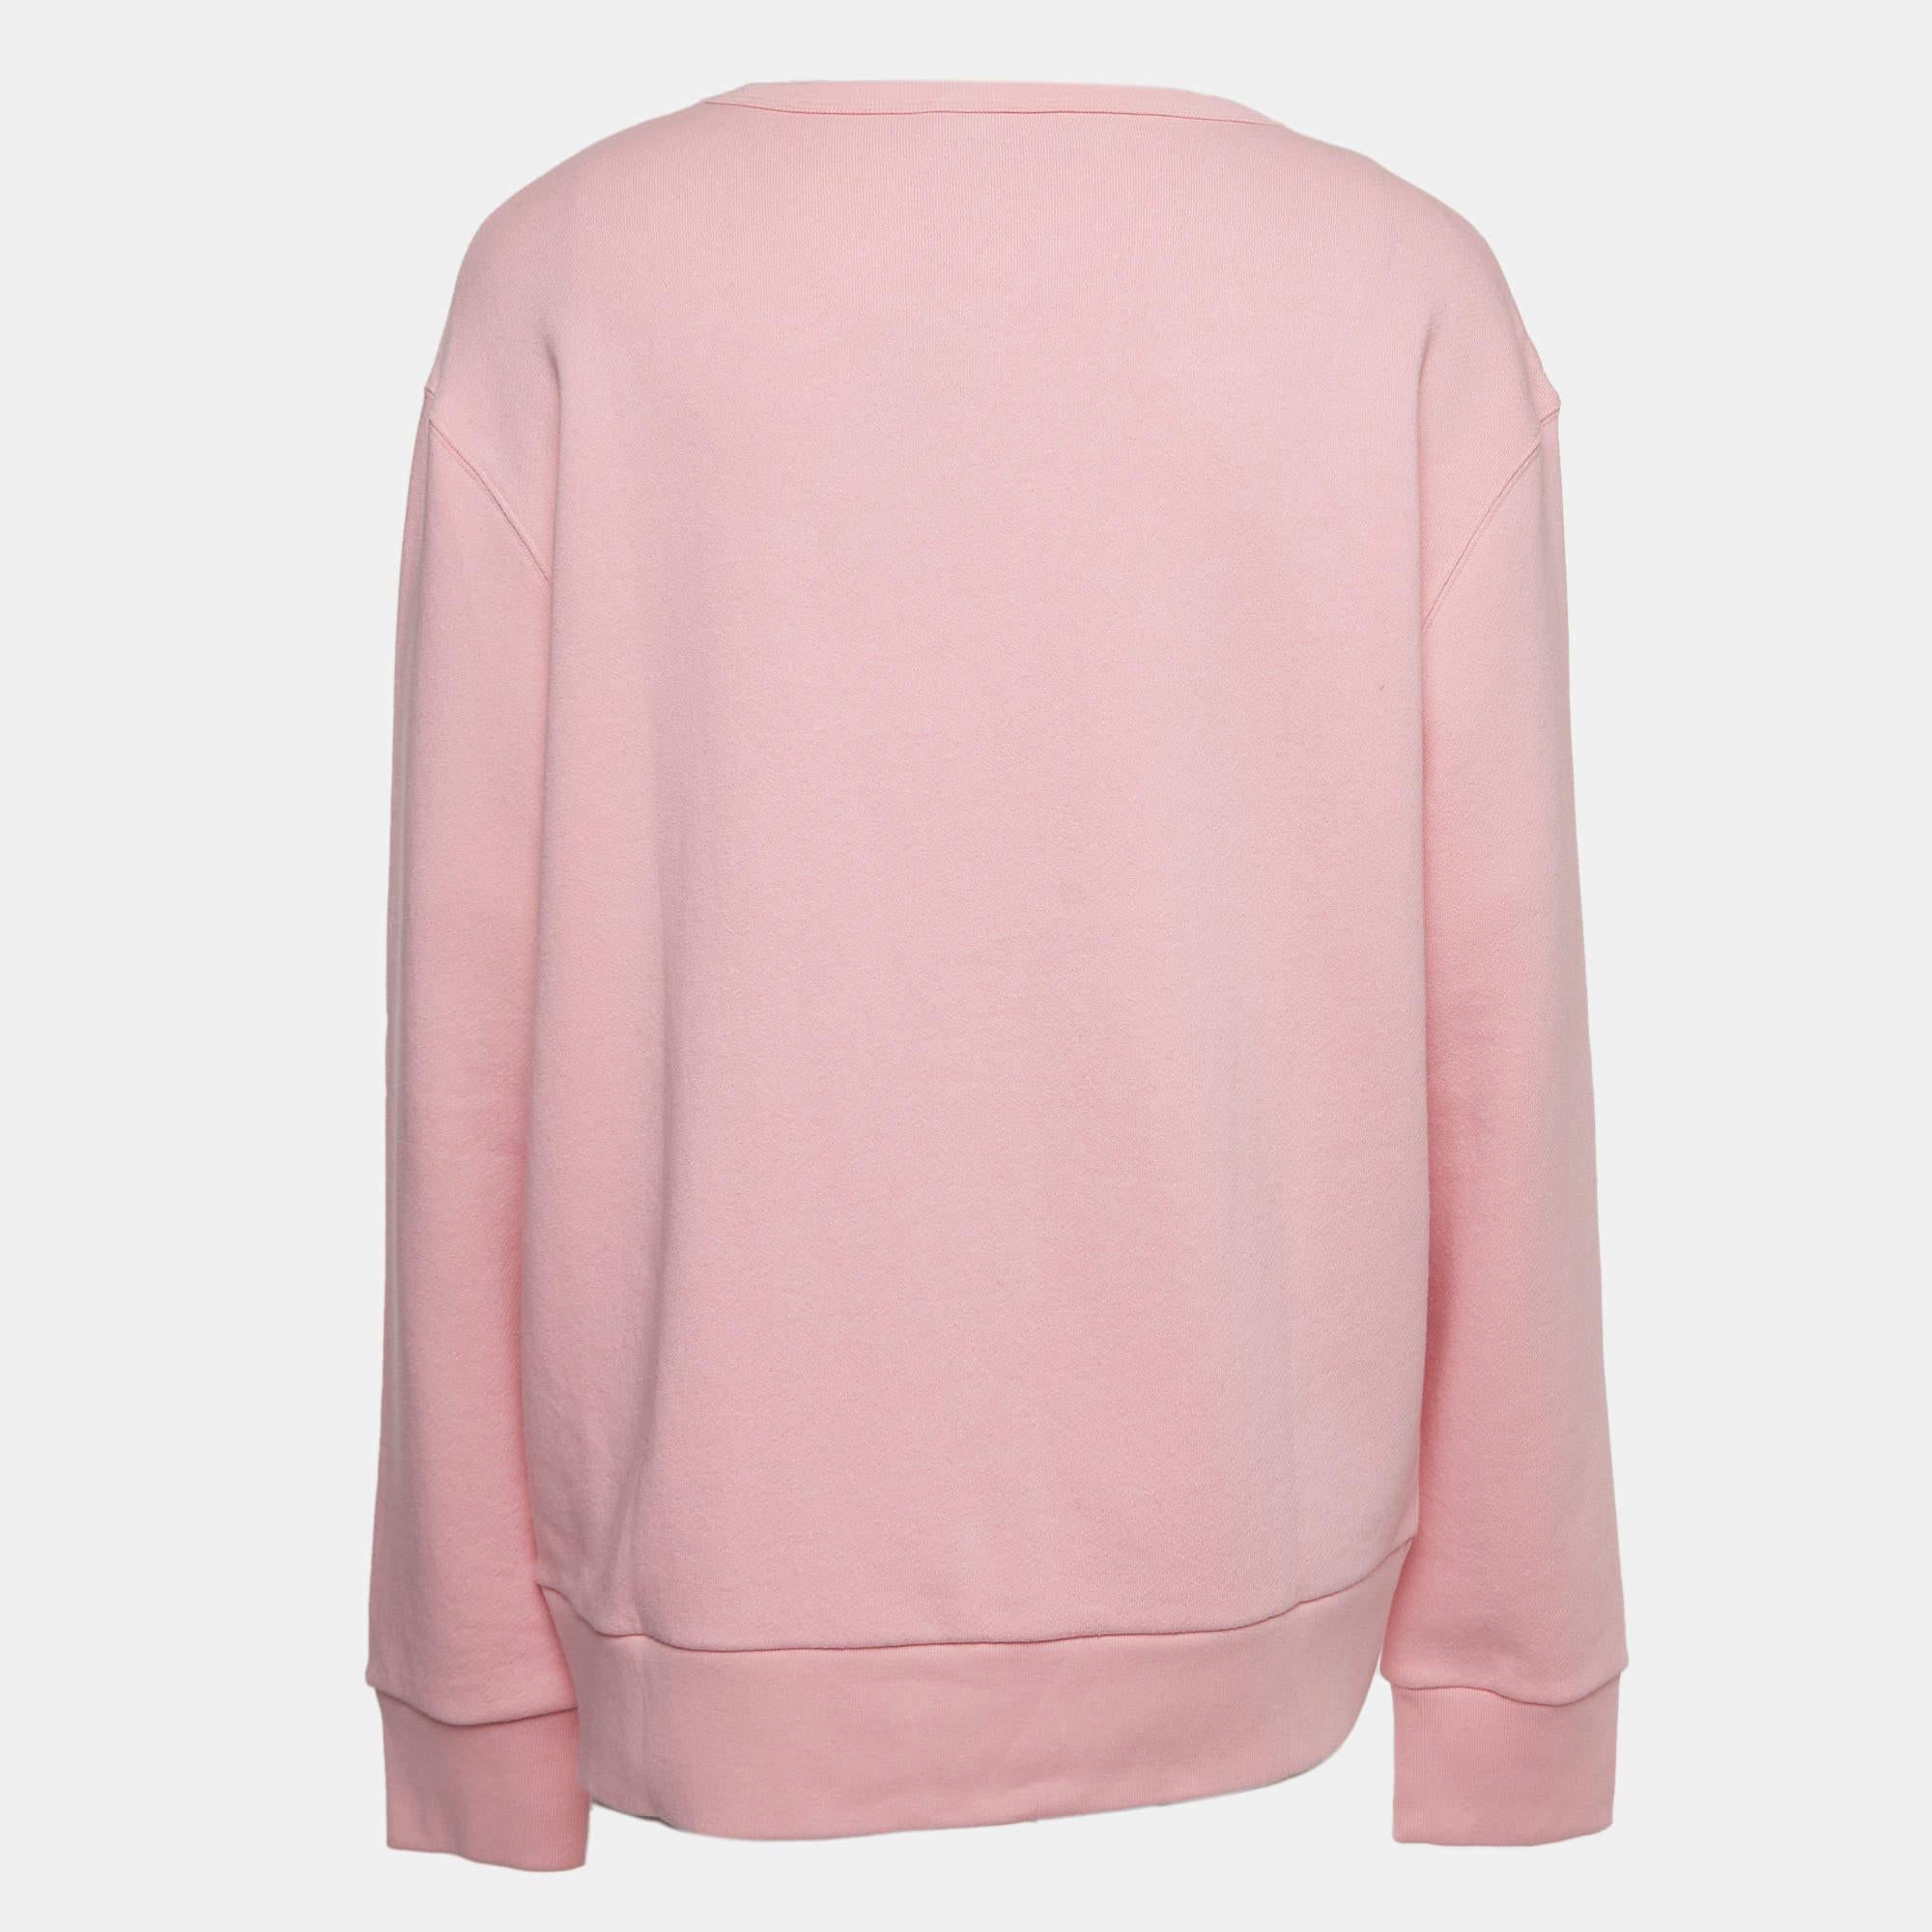 Whether you want to go out on casual outings with friends or just want to lounge around, this sweatshirt is a versatile piece and can be styled in many ways. It has been made using fine fabric.

